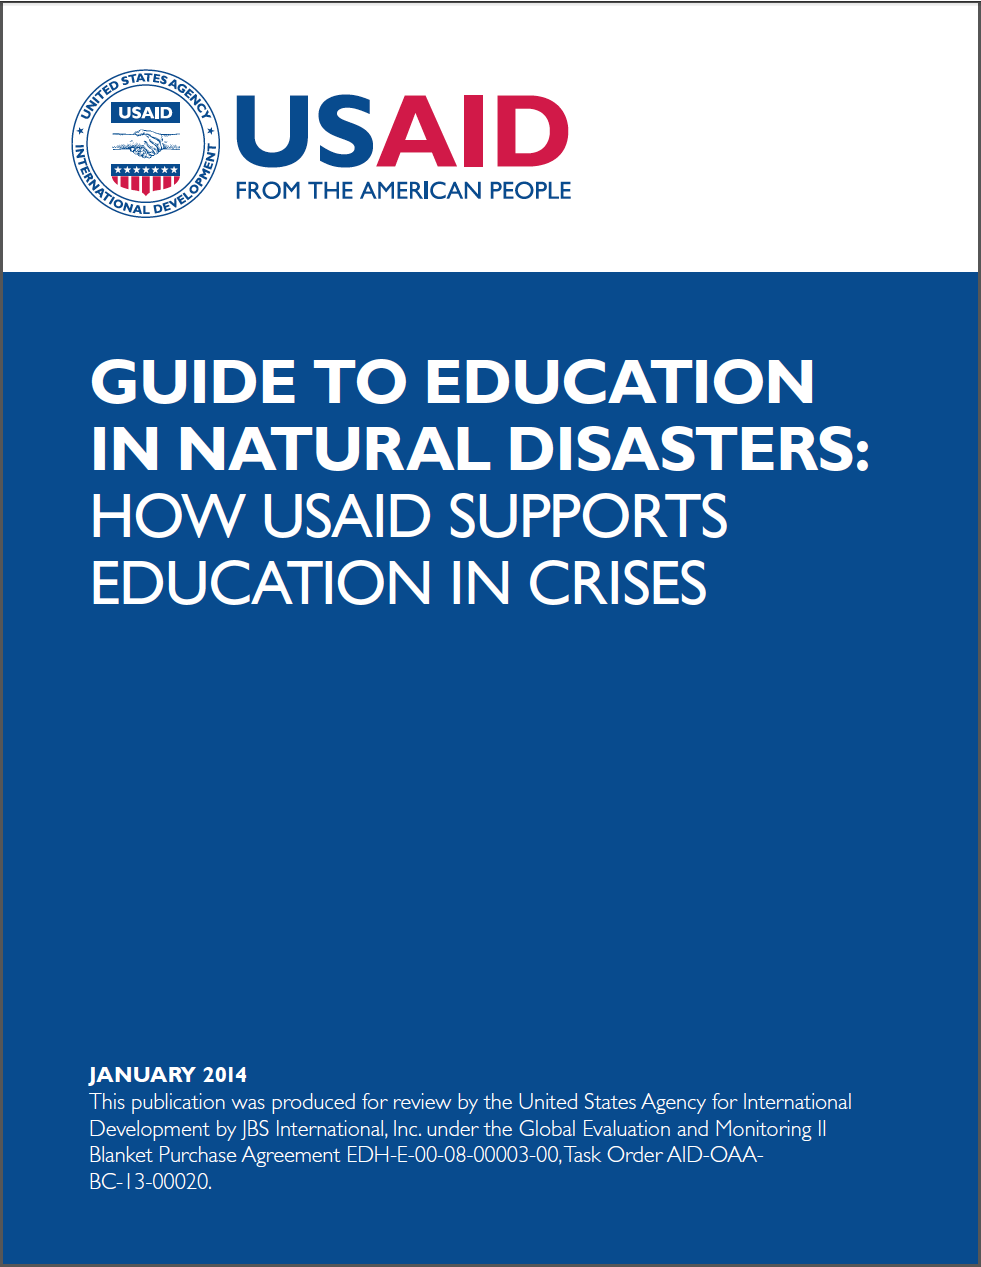 Guide to Education in Natural Disasters: How USAID Supports Education in Crises